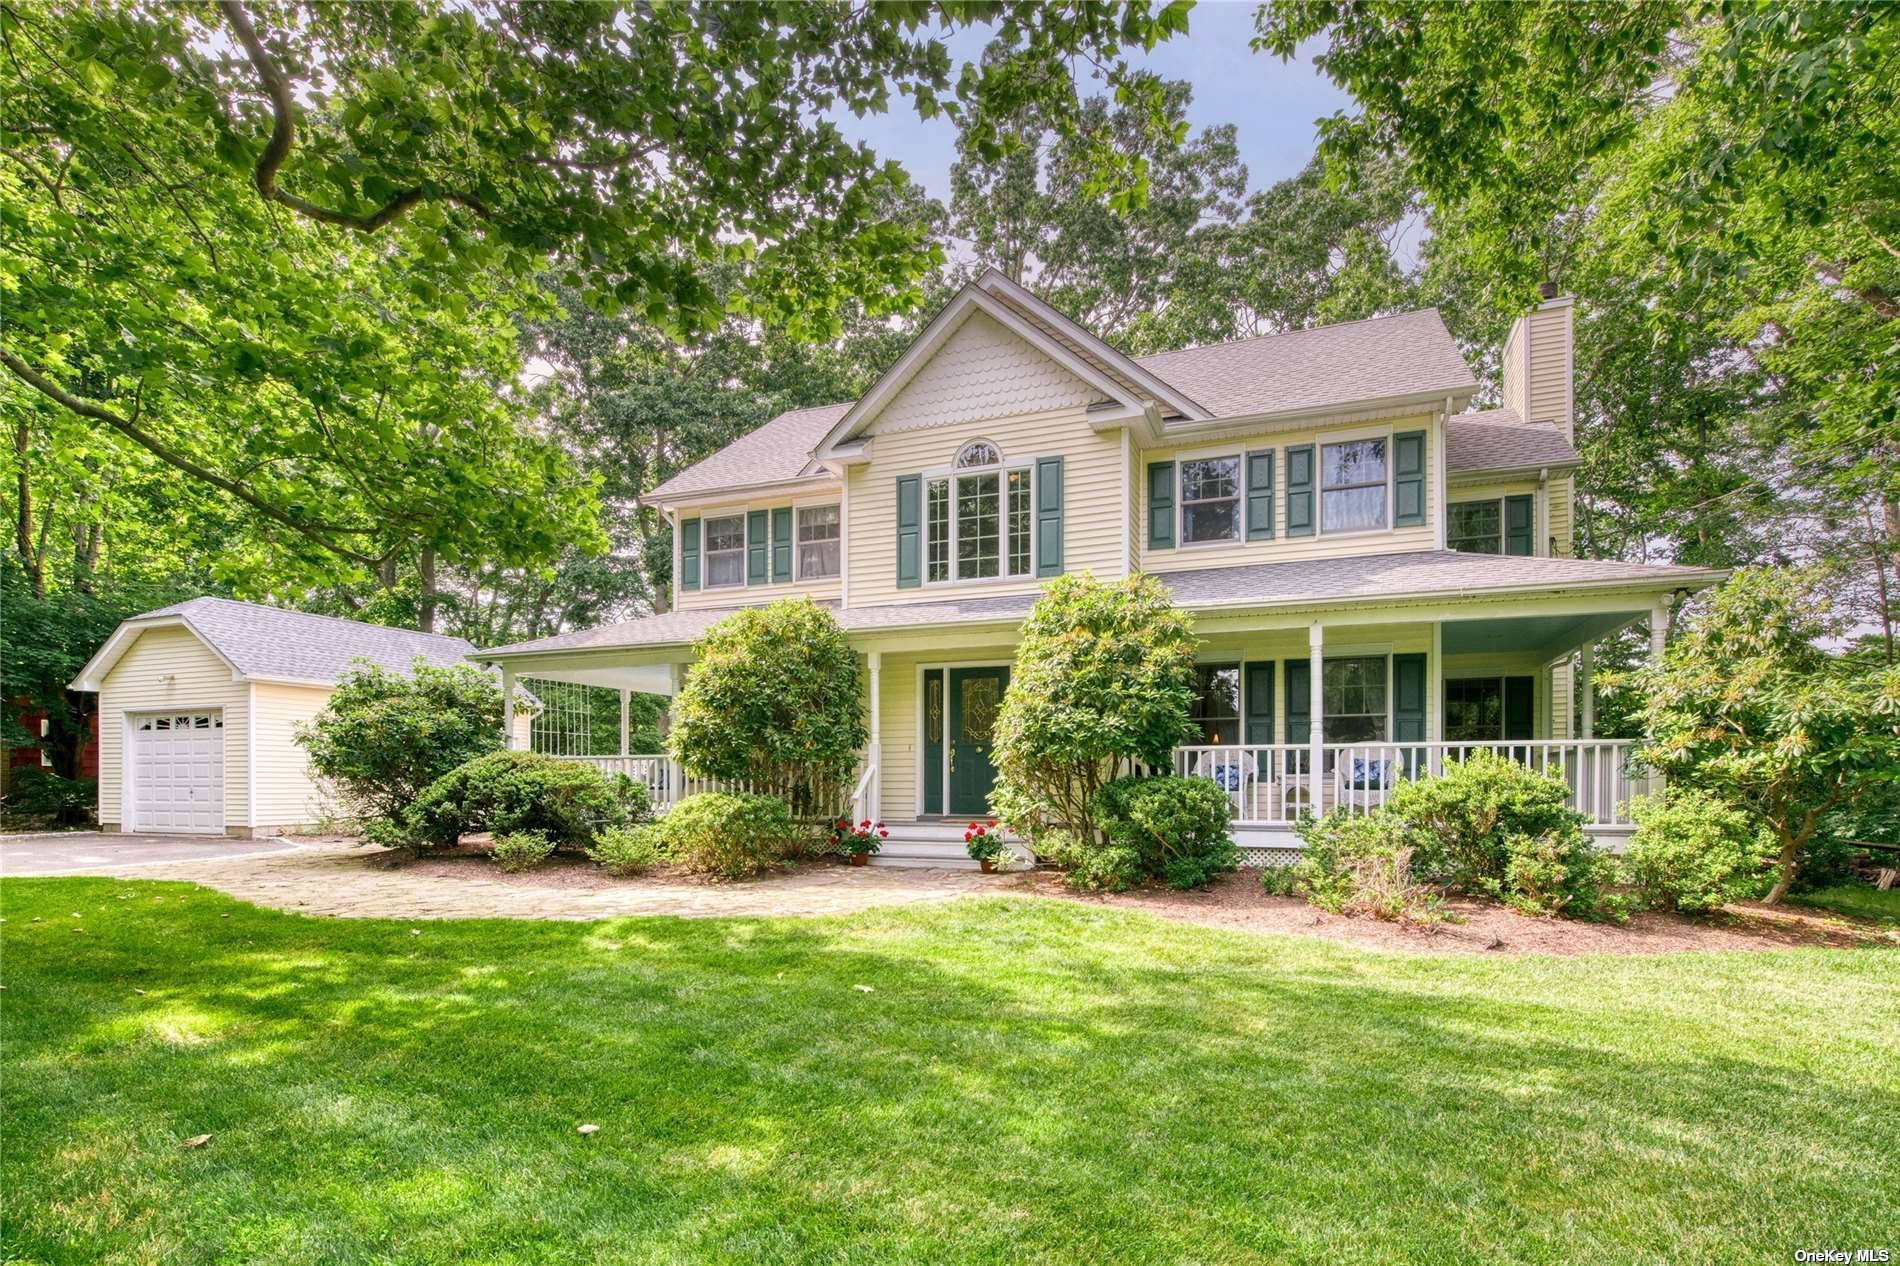 Located in the quiet neighborhood, Yennecott, behind a row of mature rhododendrons a spacious Waterfront Farmhouse with wrap around porches.